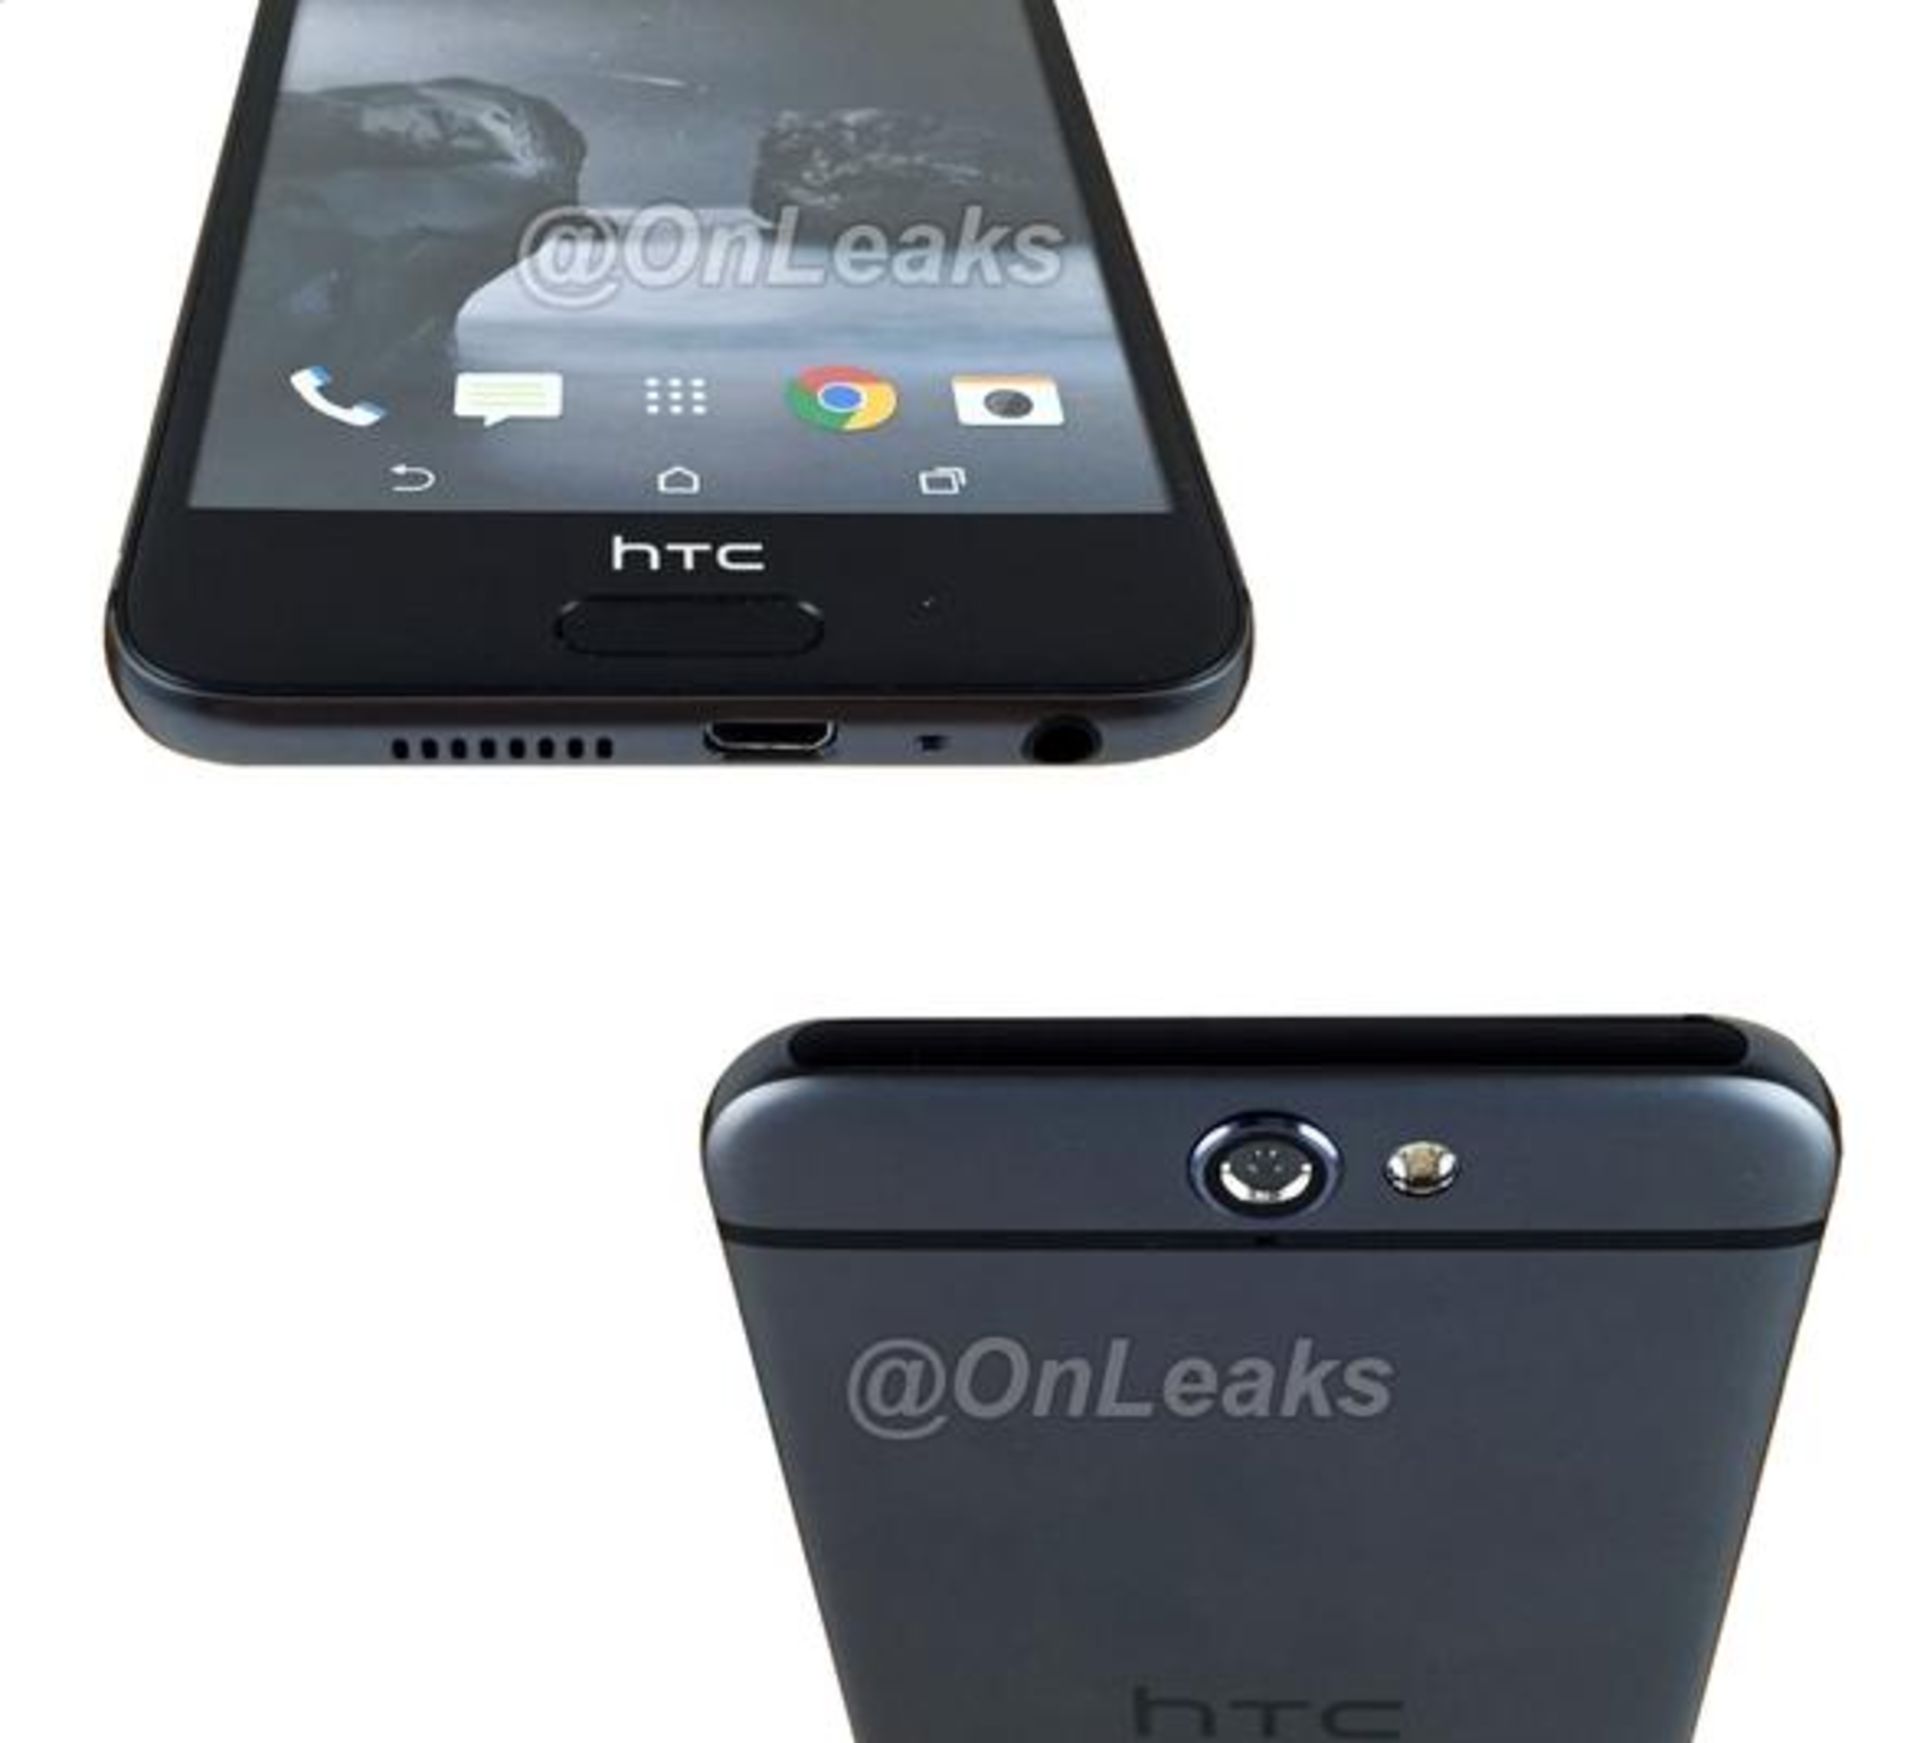 Pictures of an HTC One A9 dummy unit le8ak.jpg